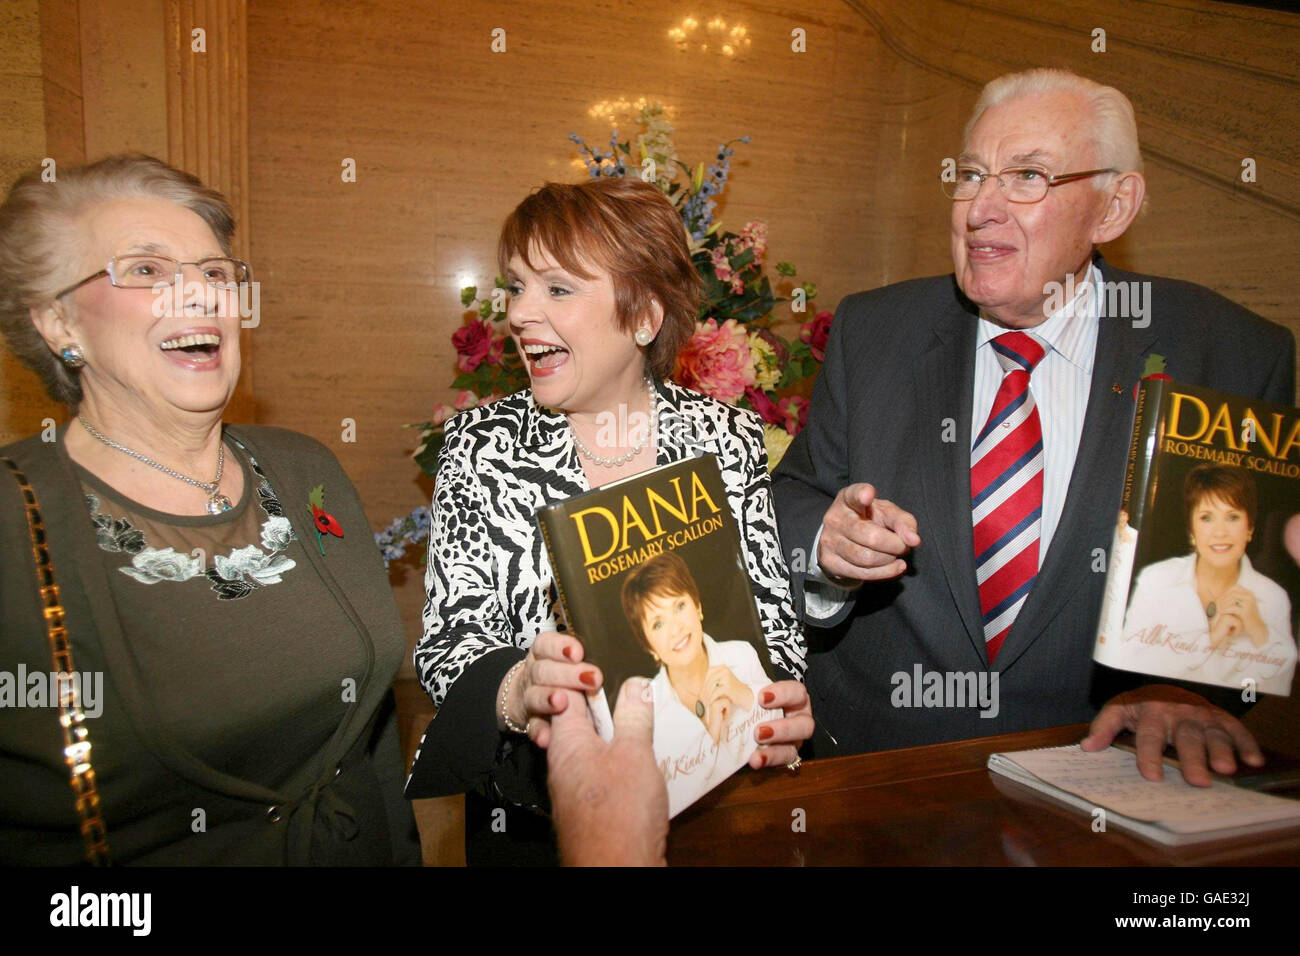 Former Eurovision song winner, Dana (centre) jokes with Northern Ireland First Minister Ian Paisley and his wife Baroness Paisley, during the Dana book launch at Parliament Buildings, Stormont. Stock Photo